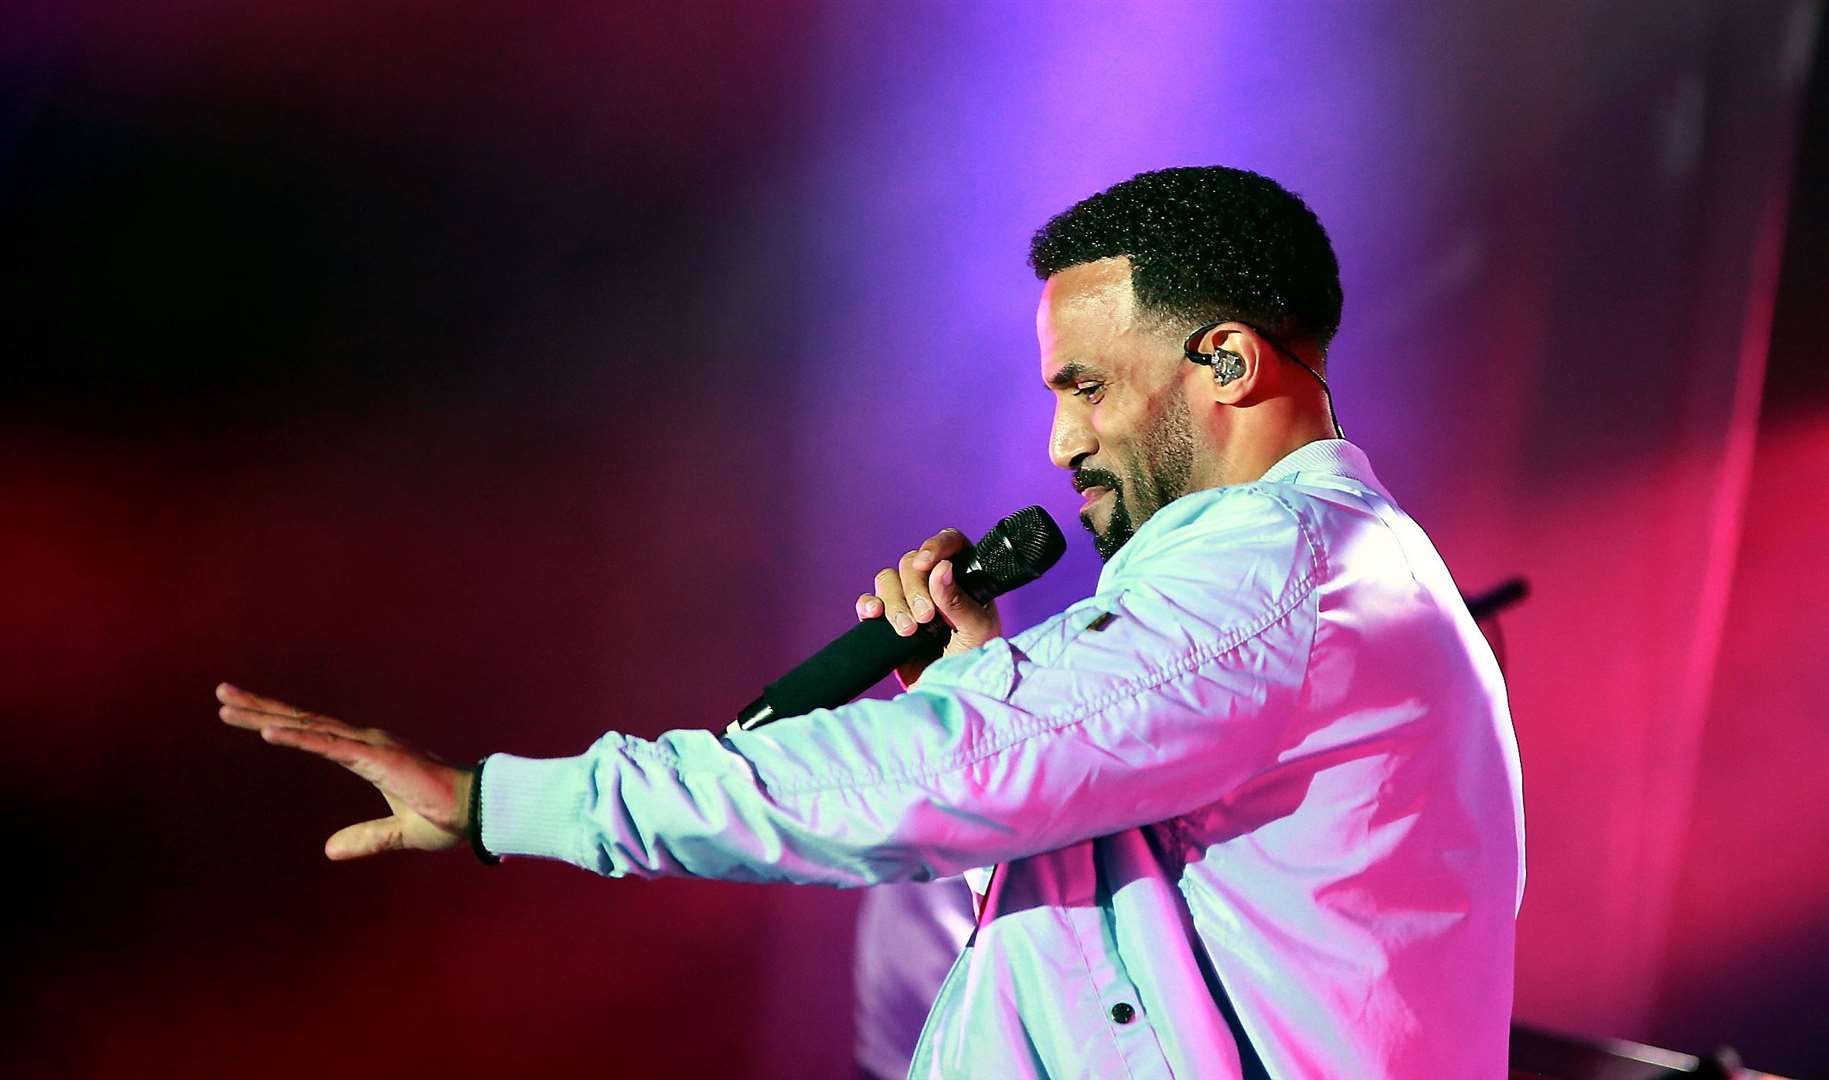 Craig David sold out Rochester Castle Concerts in 2017, but only managed to sell 2,606 tickets after being brought in last minute in 2019 to replace Jess Glynne